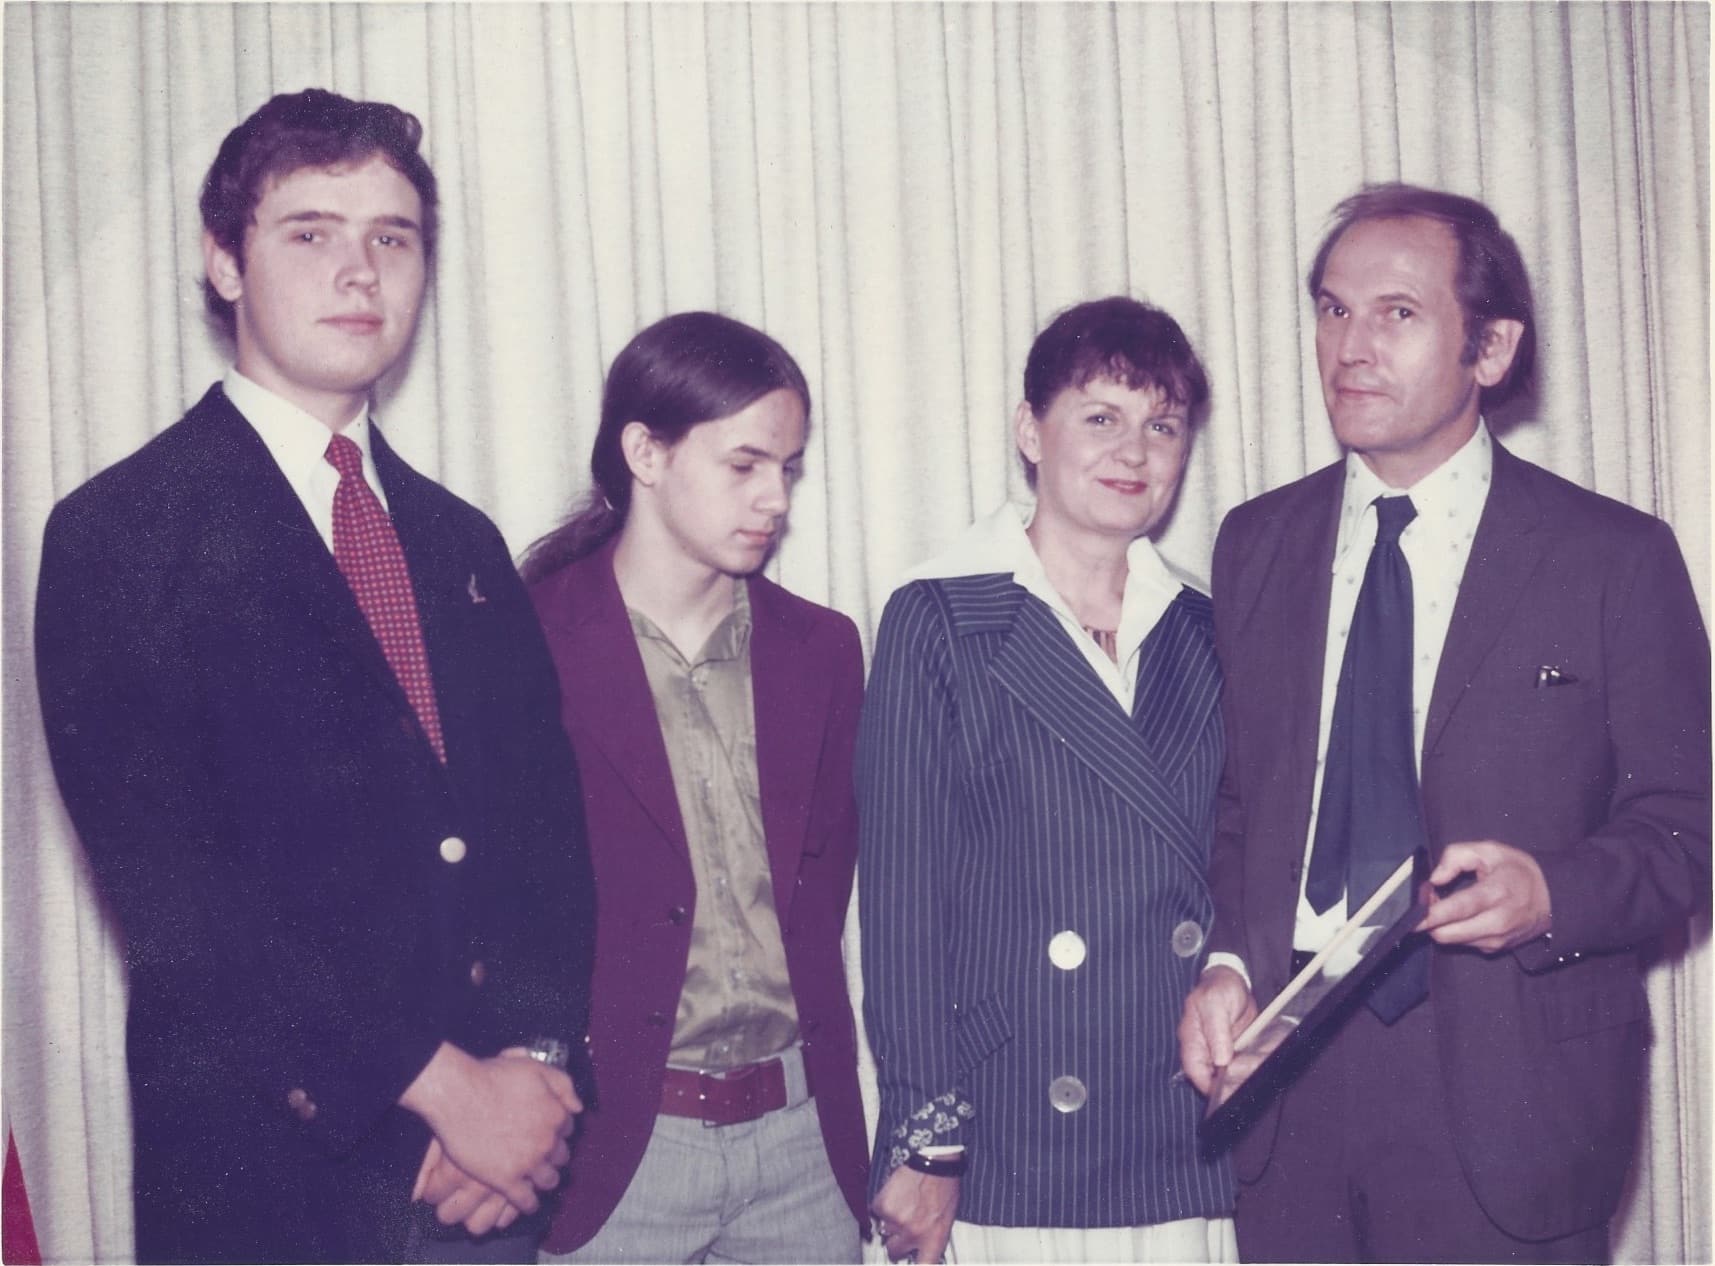 Lance, Marshall, Julie and Hugh McMillan during the CIA years.